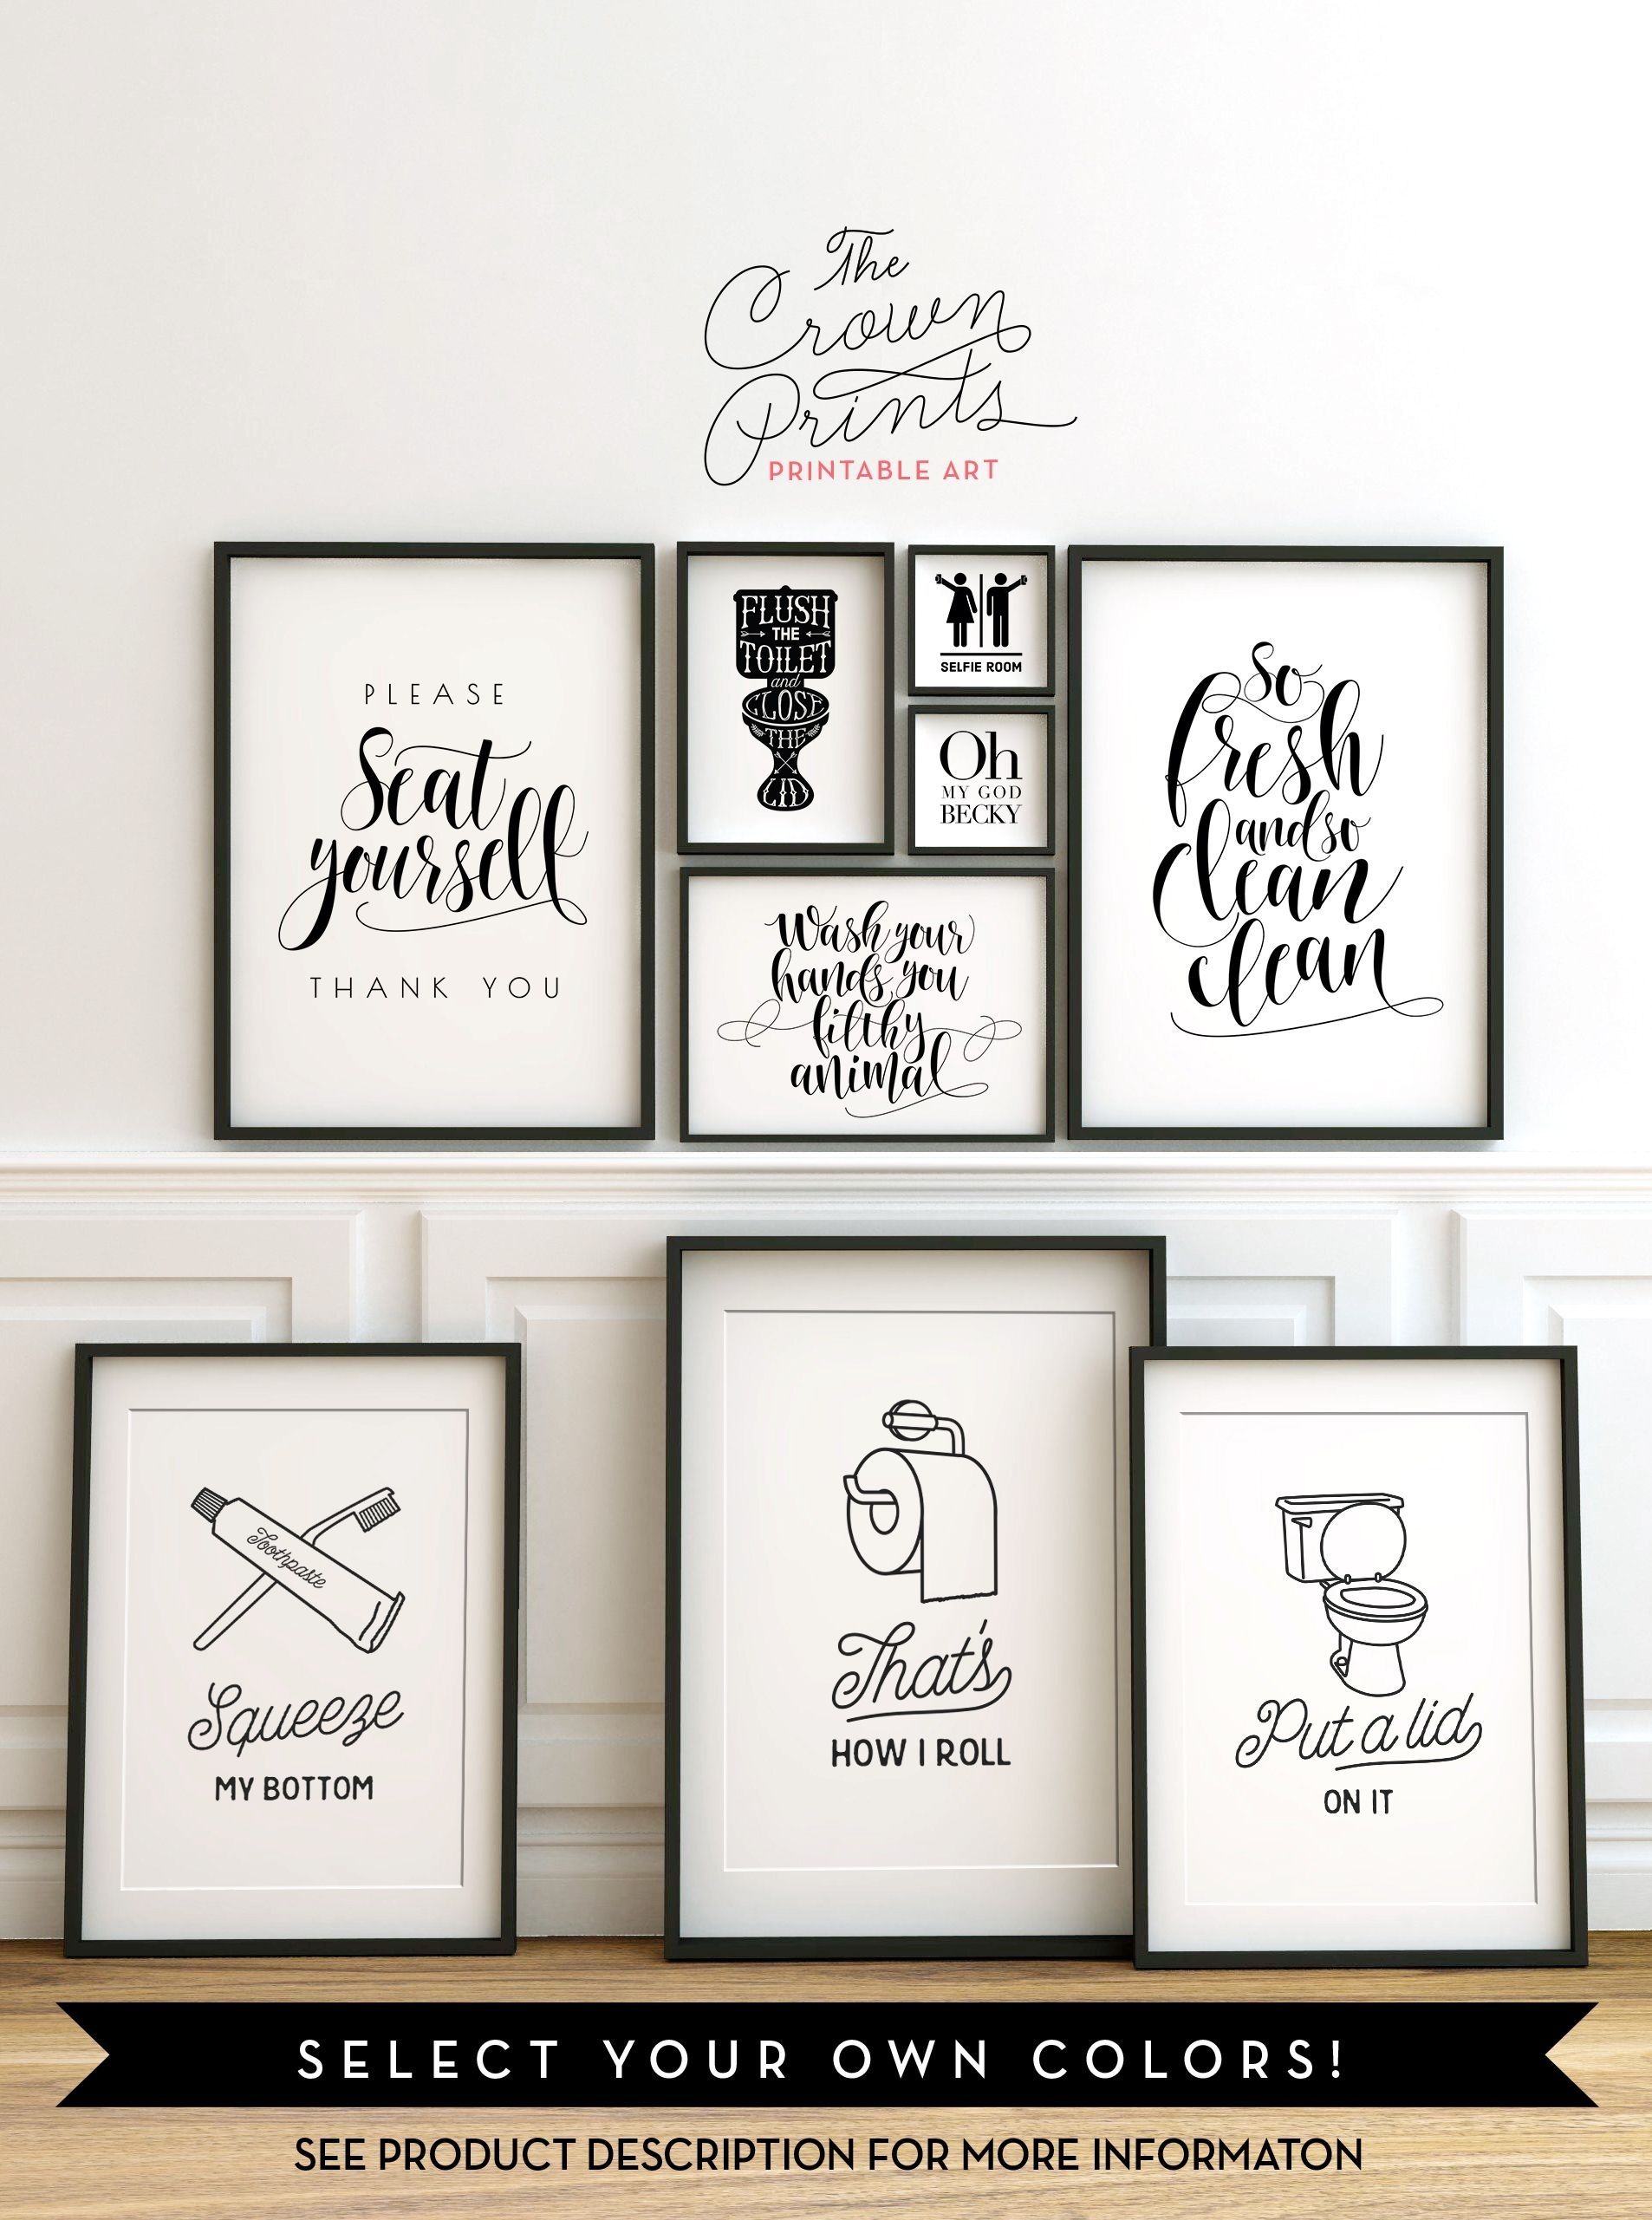 Printable Bathroom Wall Art From The Crown Prints On Etsy – Lots Of With Regard To Wall Art For Bathroom (View 1 of 20)